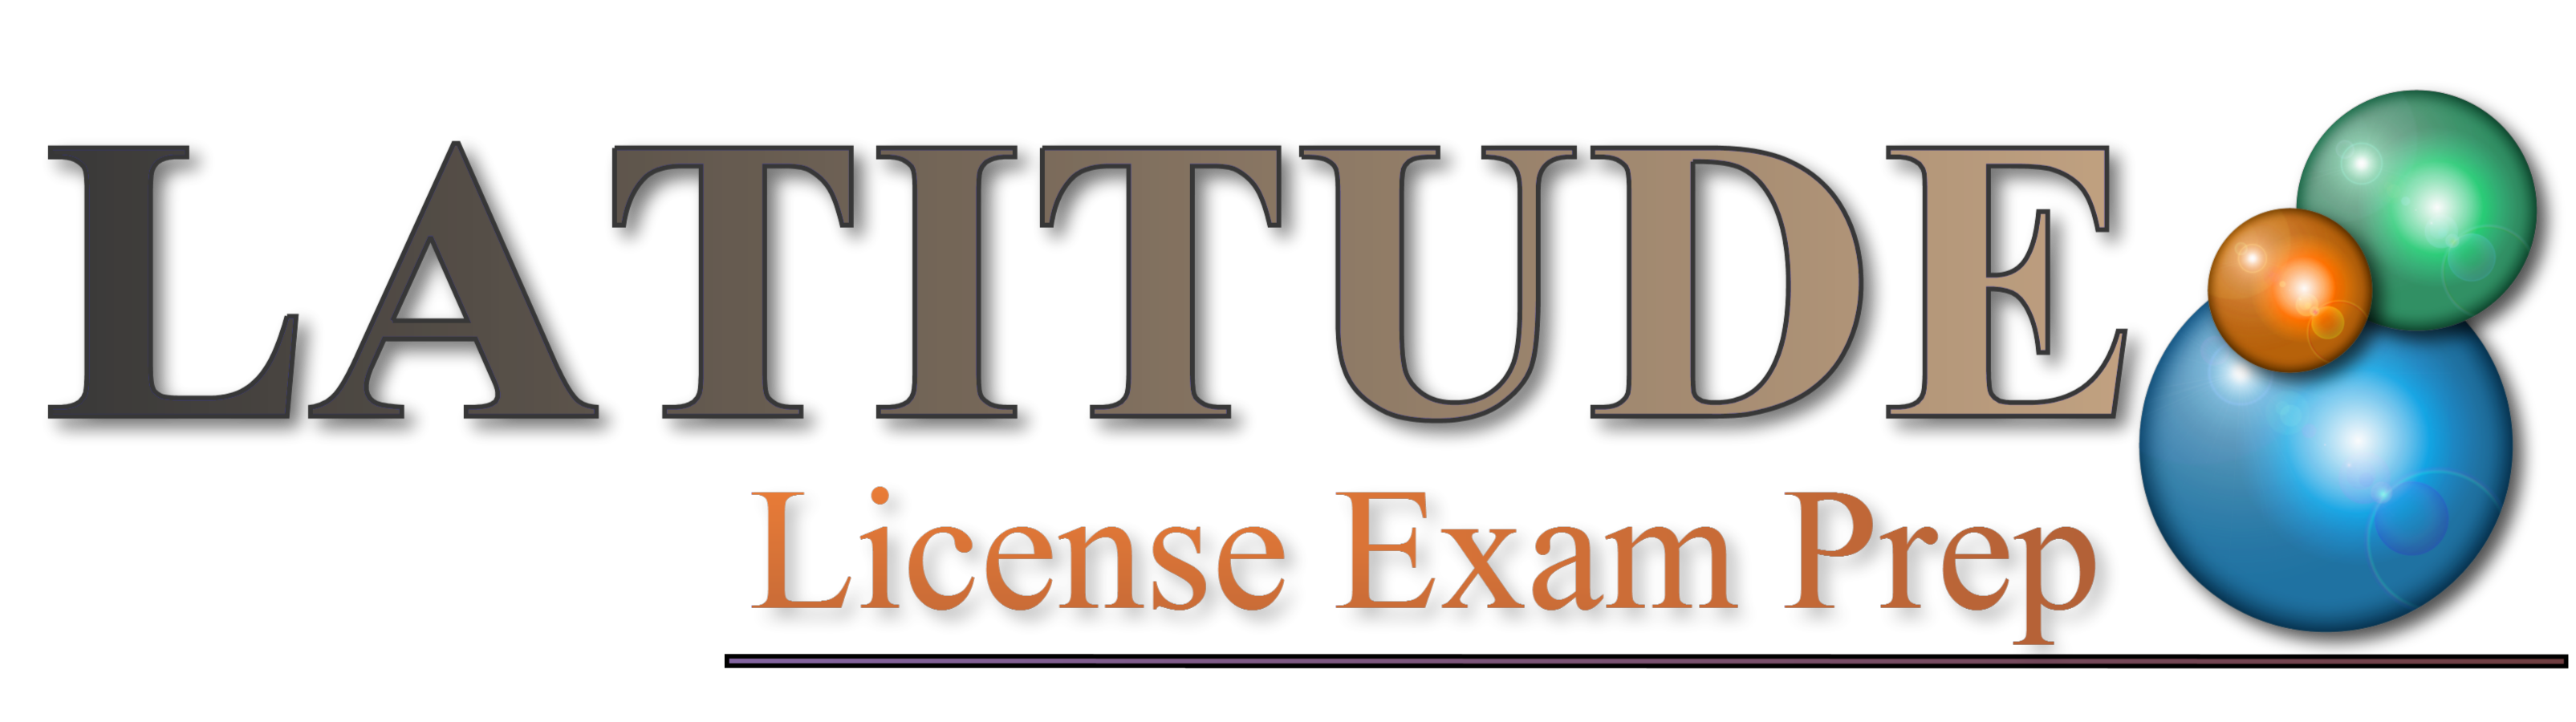 LATITUDE Insurance and Securities Test Prep Contact Info